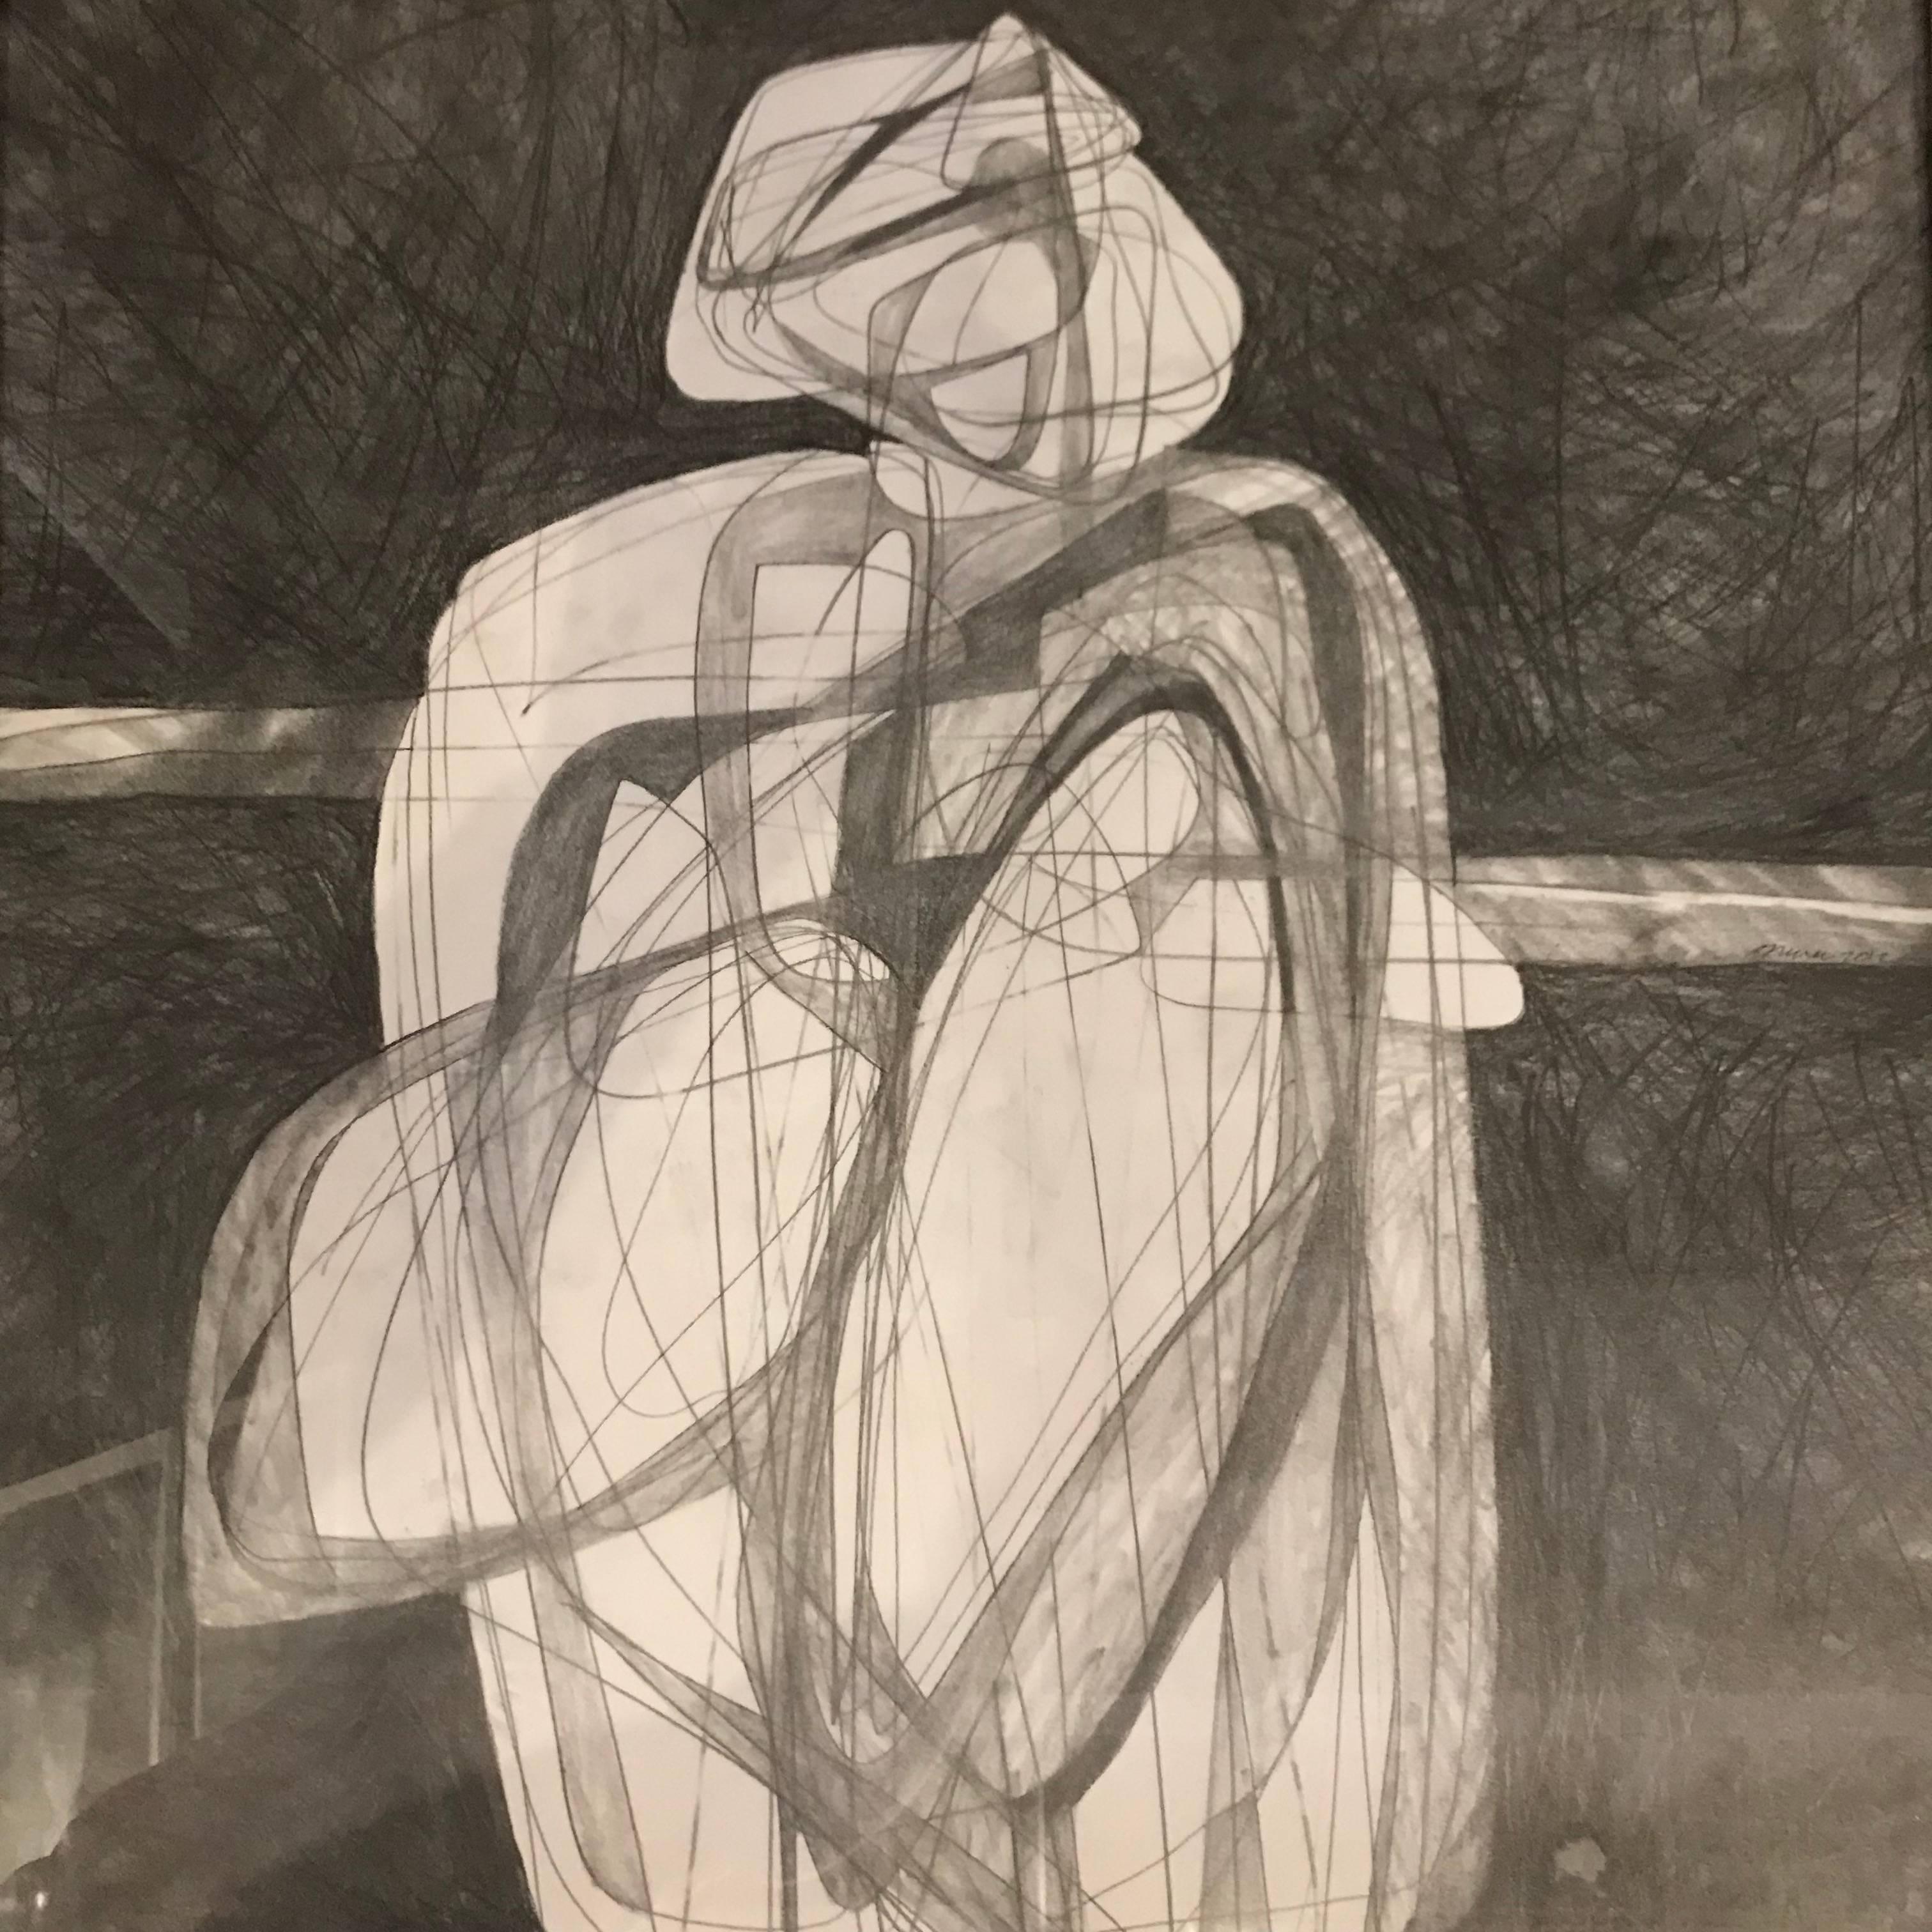 Contemporary abstract original charcoal drawing by American artist David Dew Bruner.
Inspired by the artist Graham Sutherland.
One of many pieces from a large body of works.
Vintage gold gilt frame.